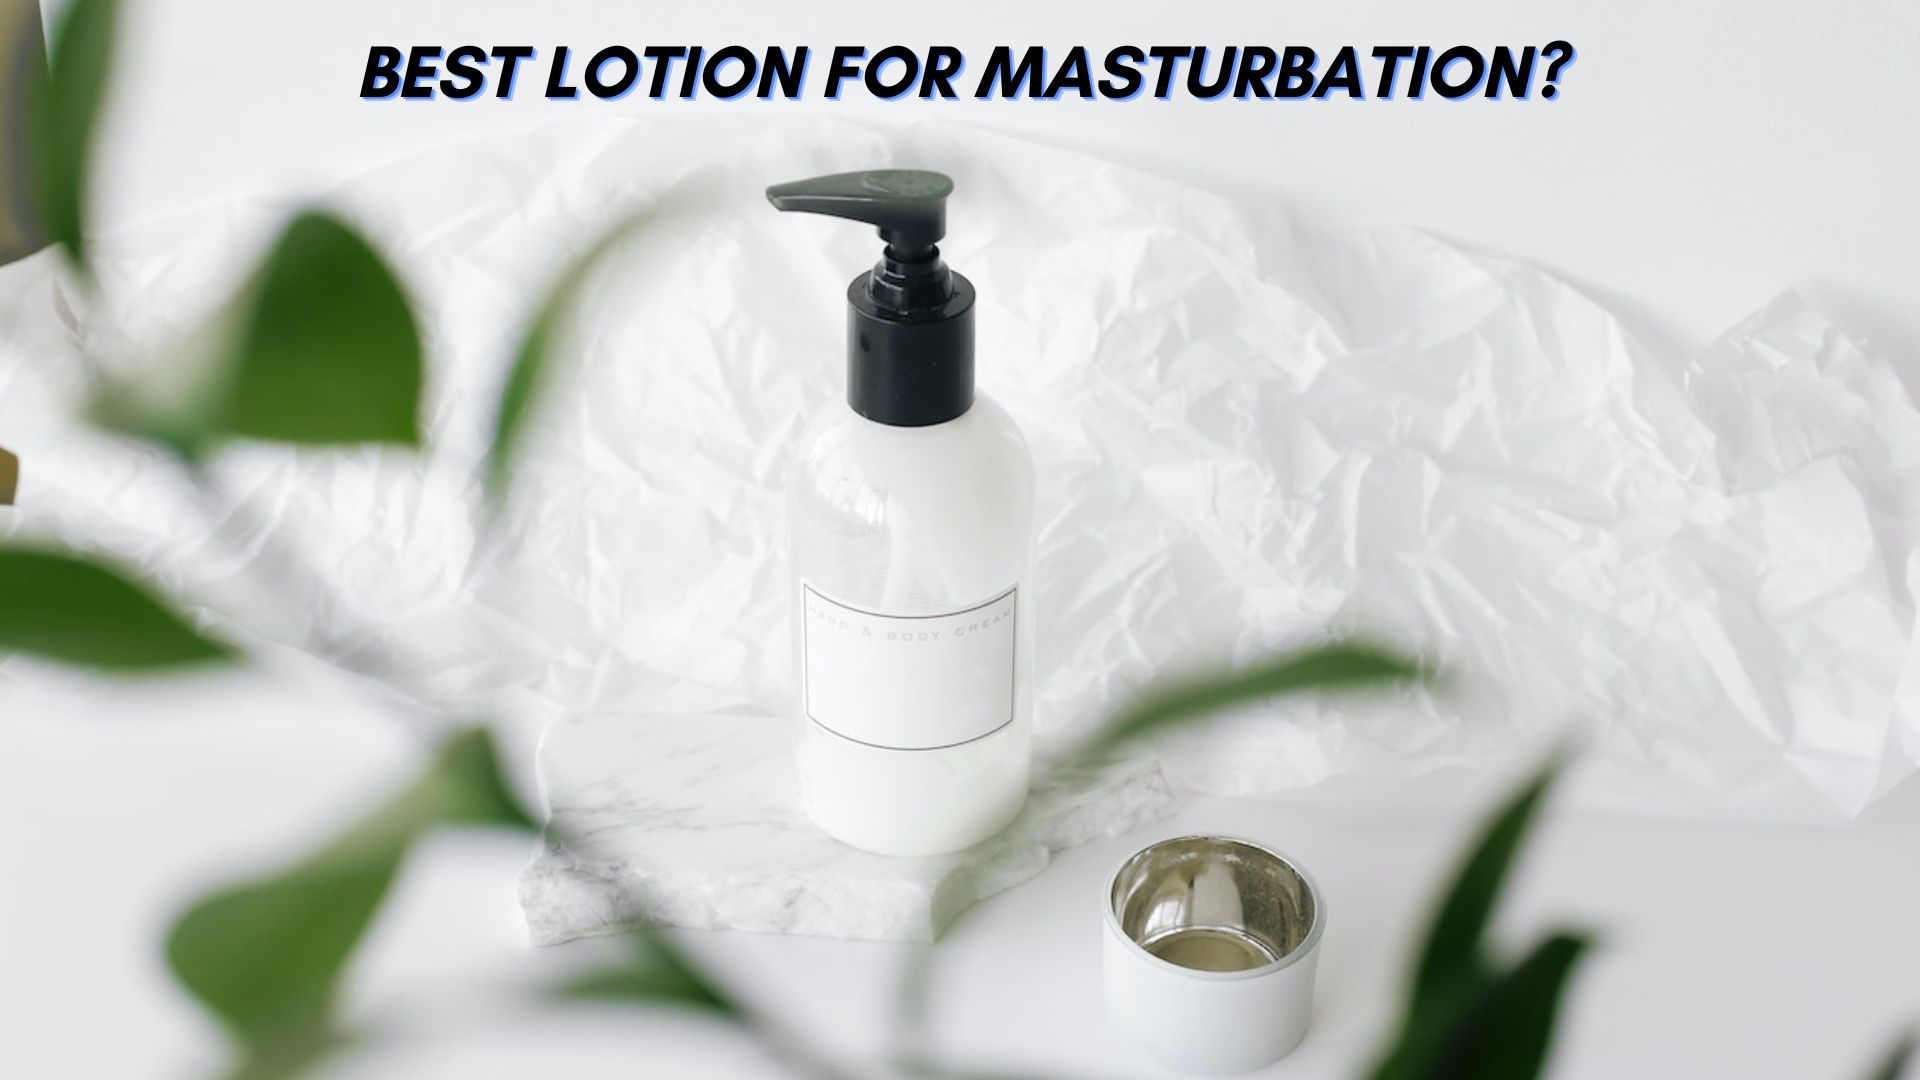 What Is The Best Lotion For Masturbation?